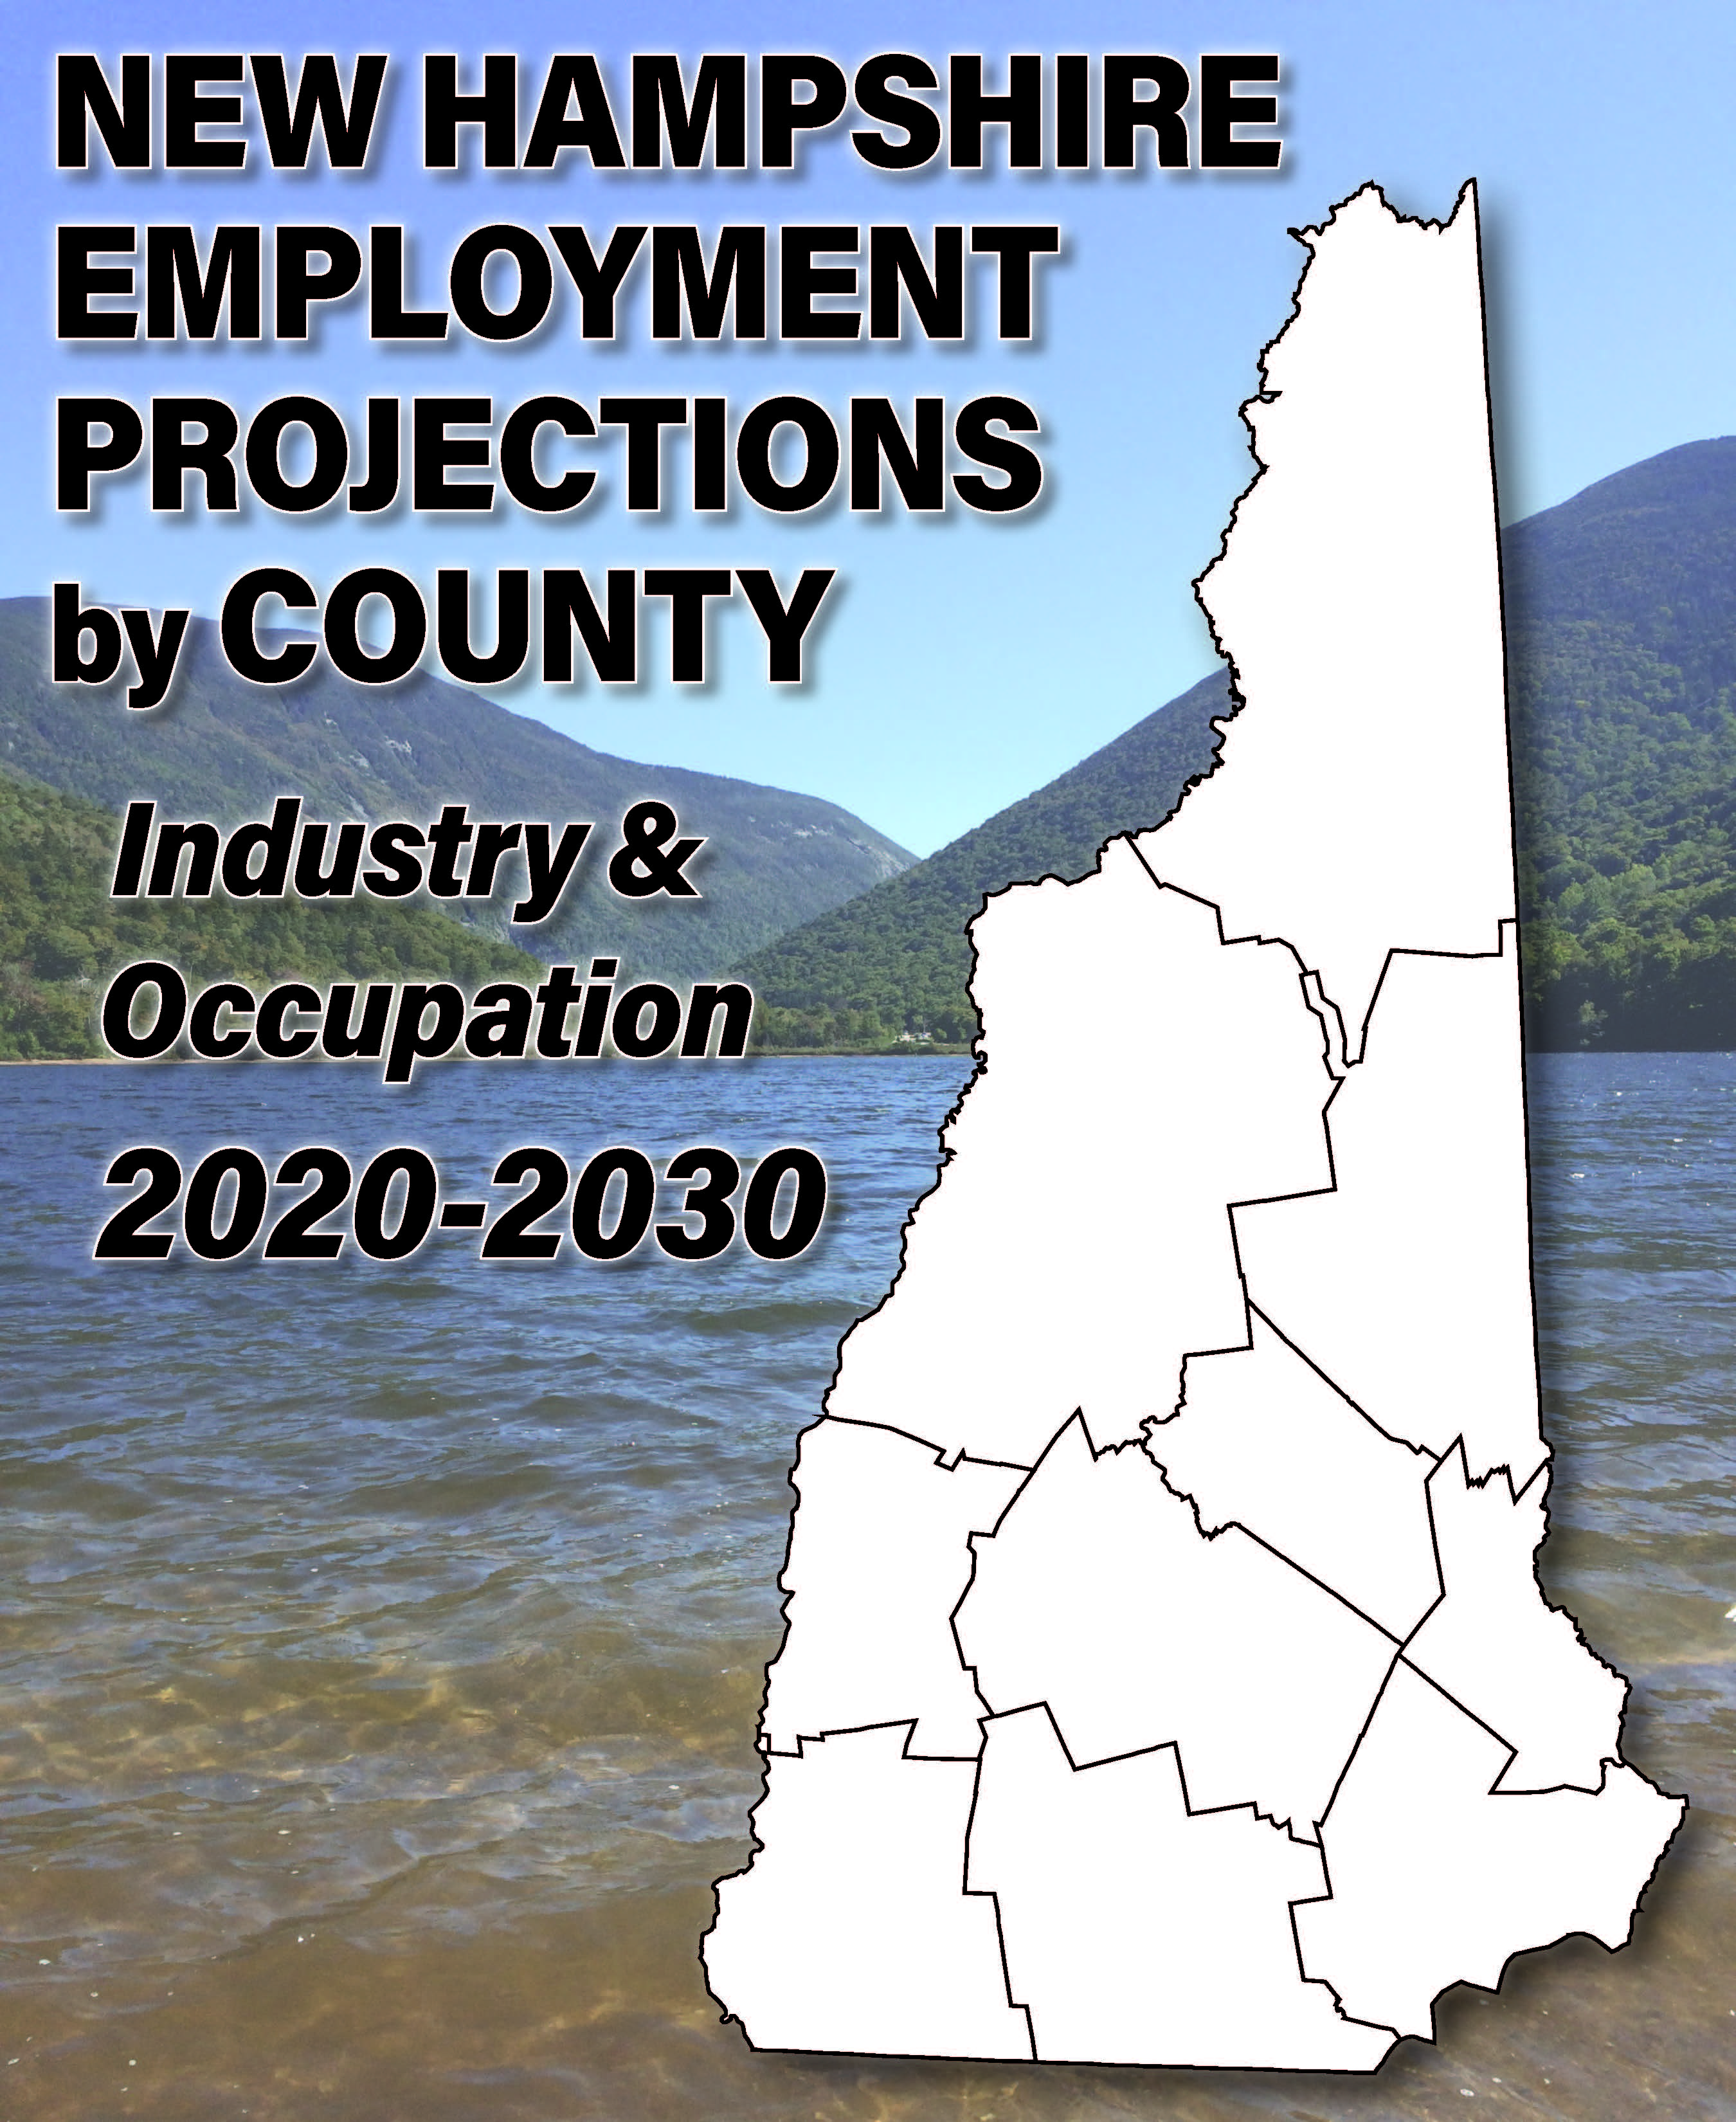 employment projections by county